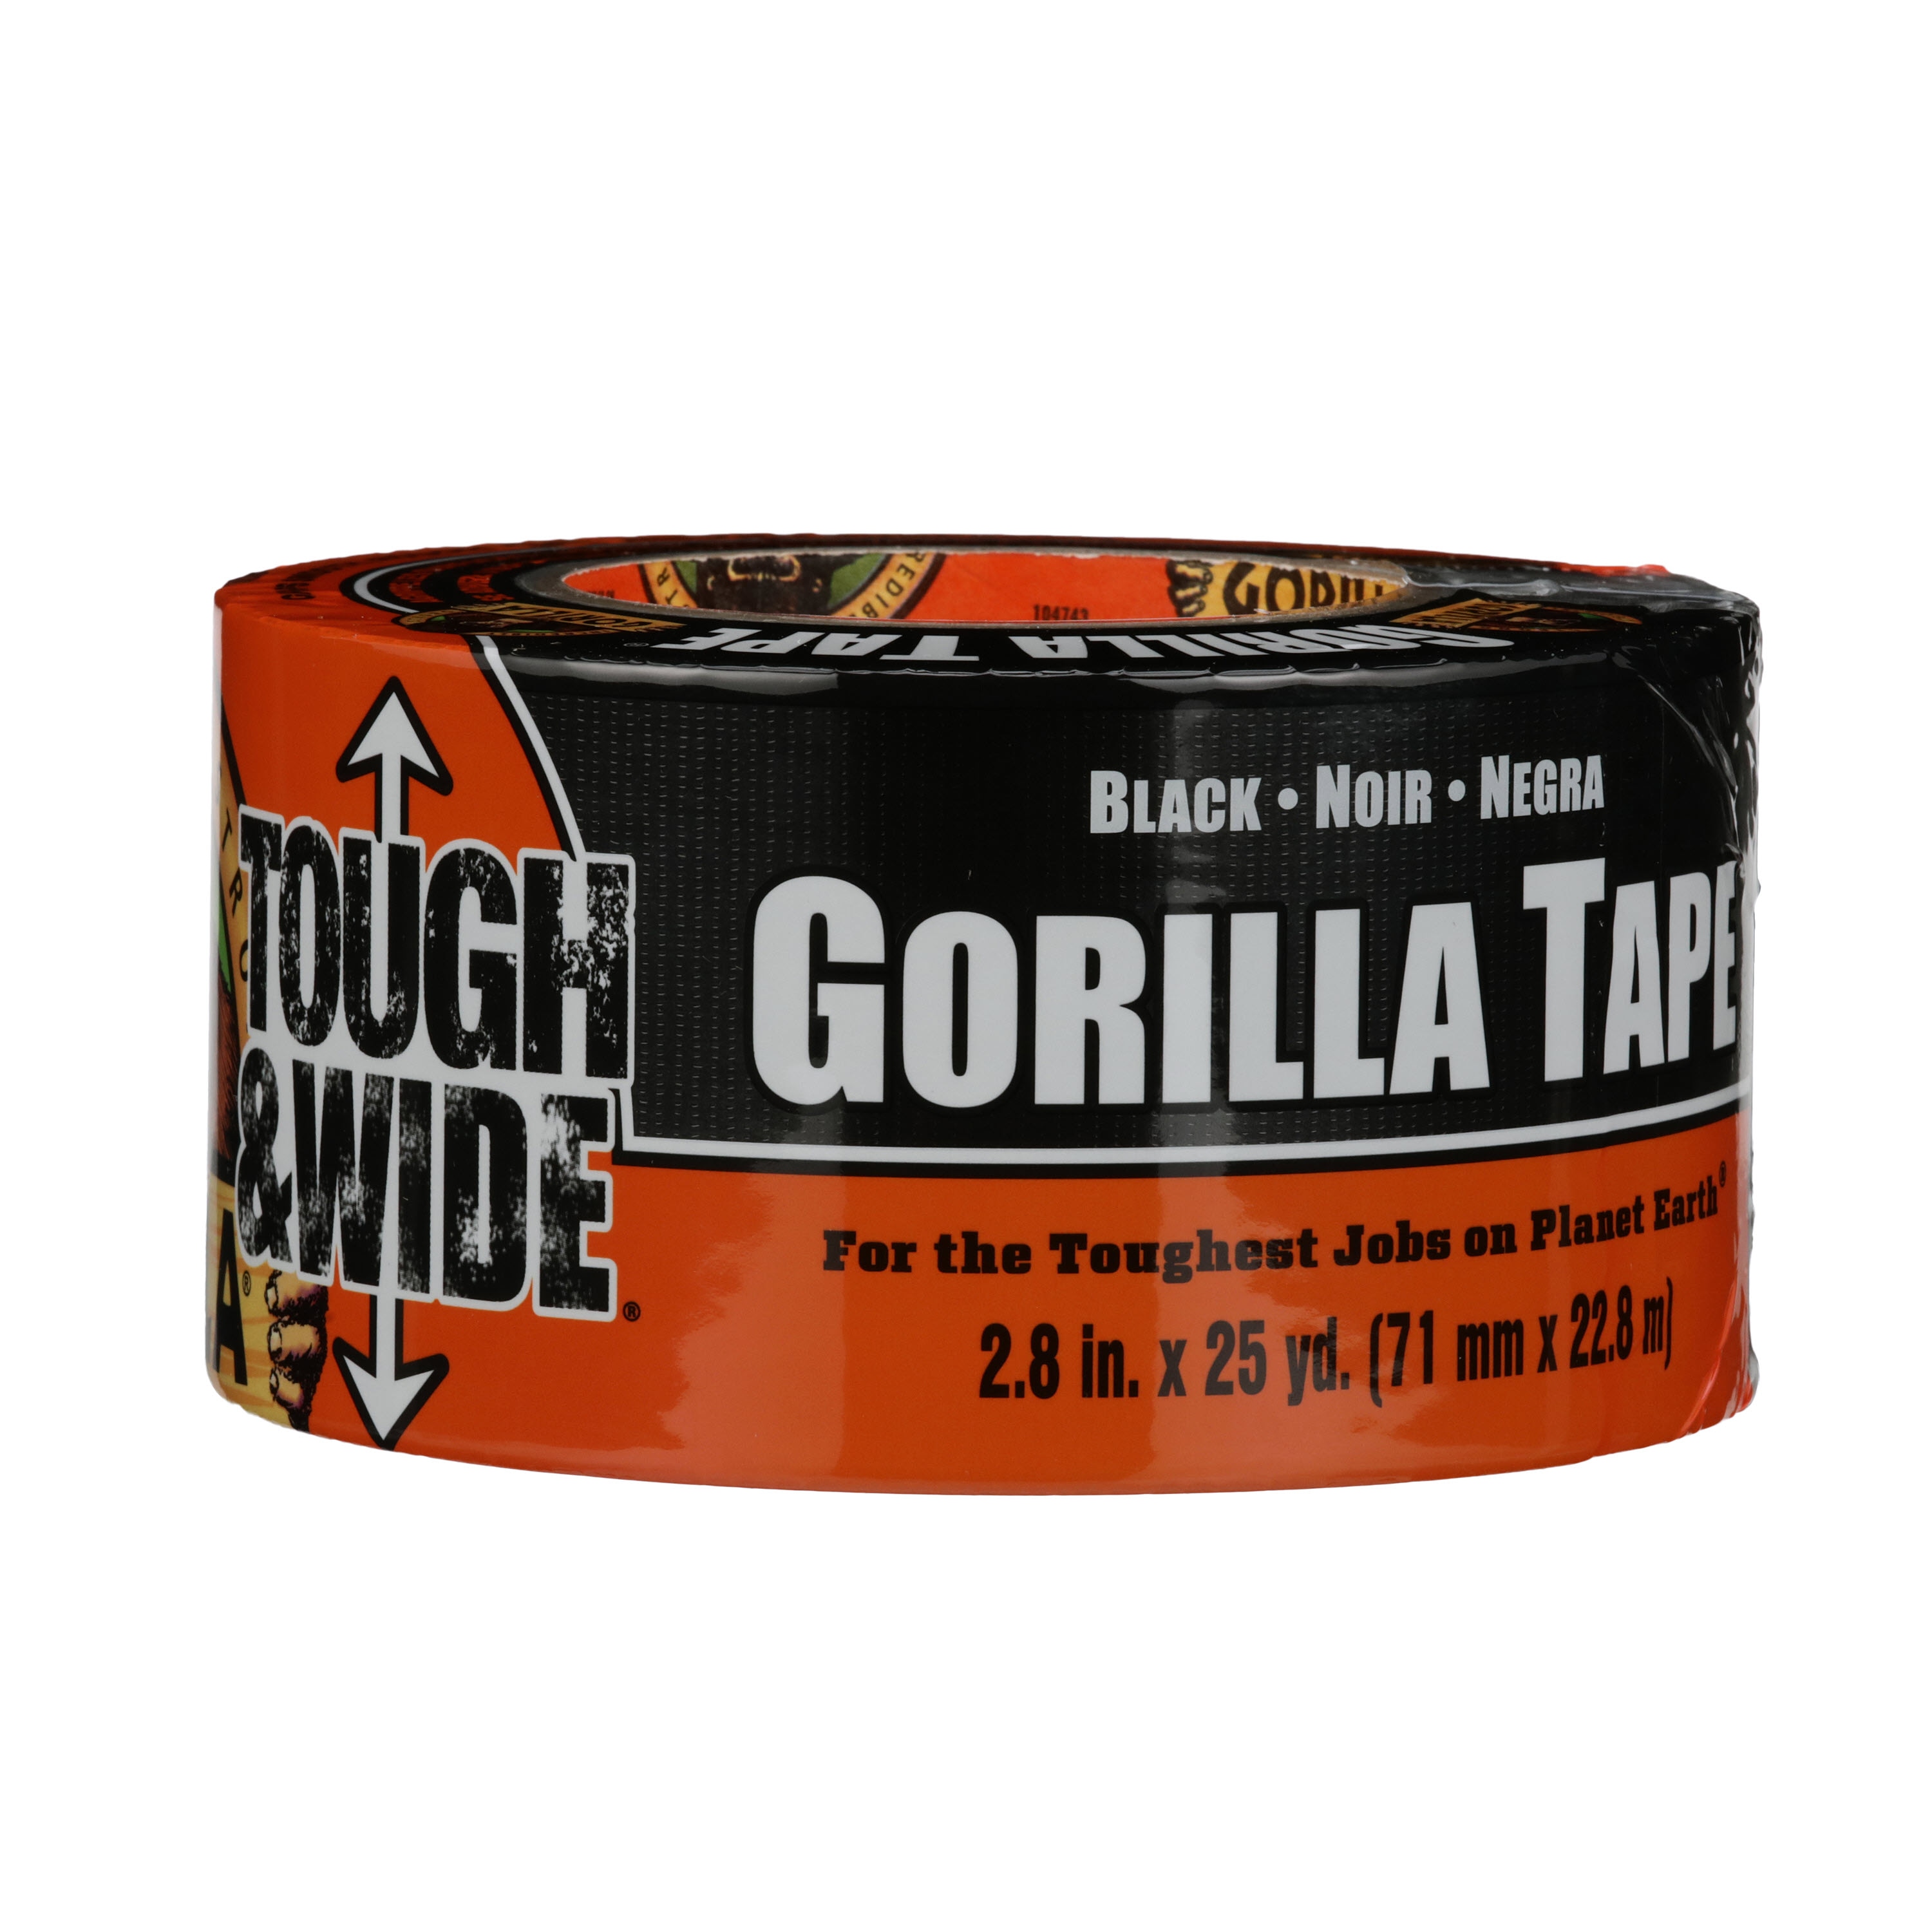 Double-Thick Adhesive Reinforced Backing All Weather Resistant Shell 2.88 in x 25 yd 105680 Silver Duct Tape Pack of 1 Gorilla Tough & Wide Utility Tape